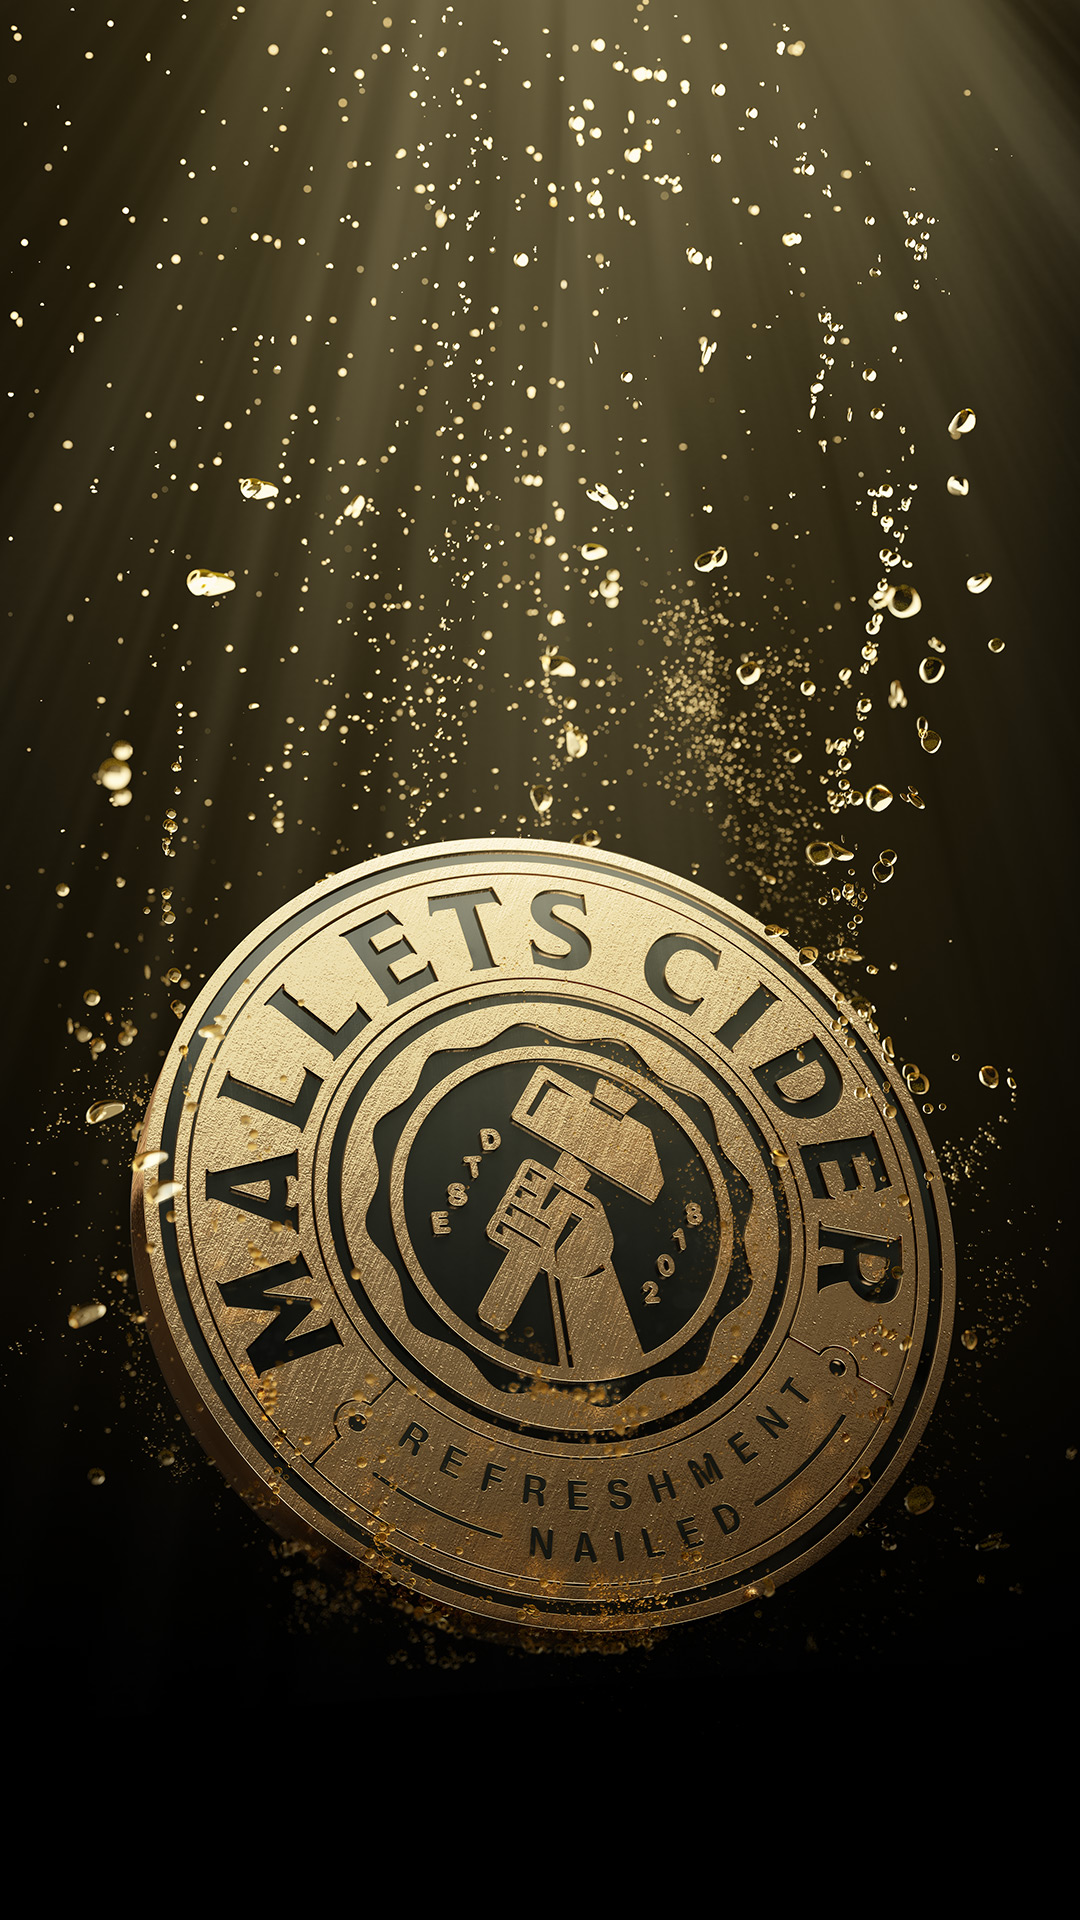 mallets-cider-3d-can-renders-03